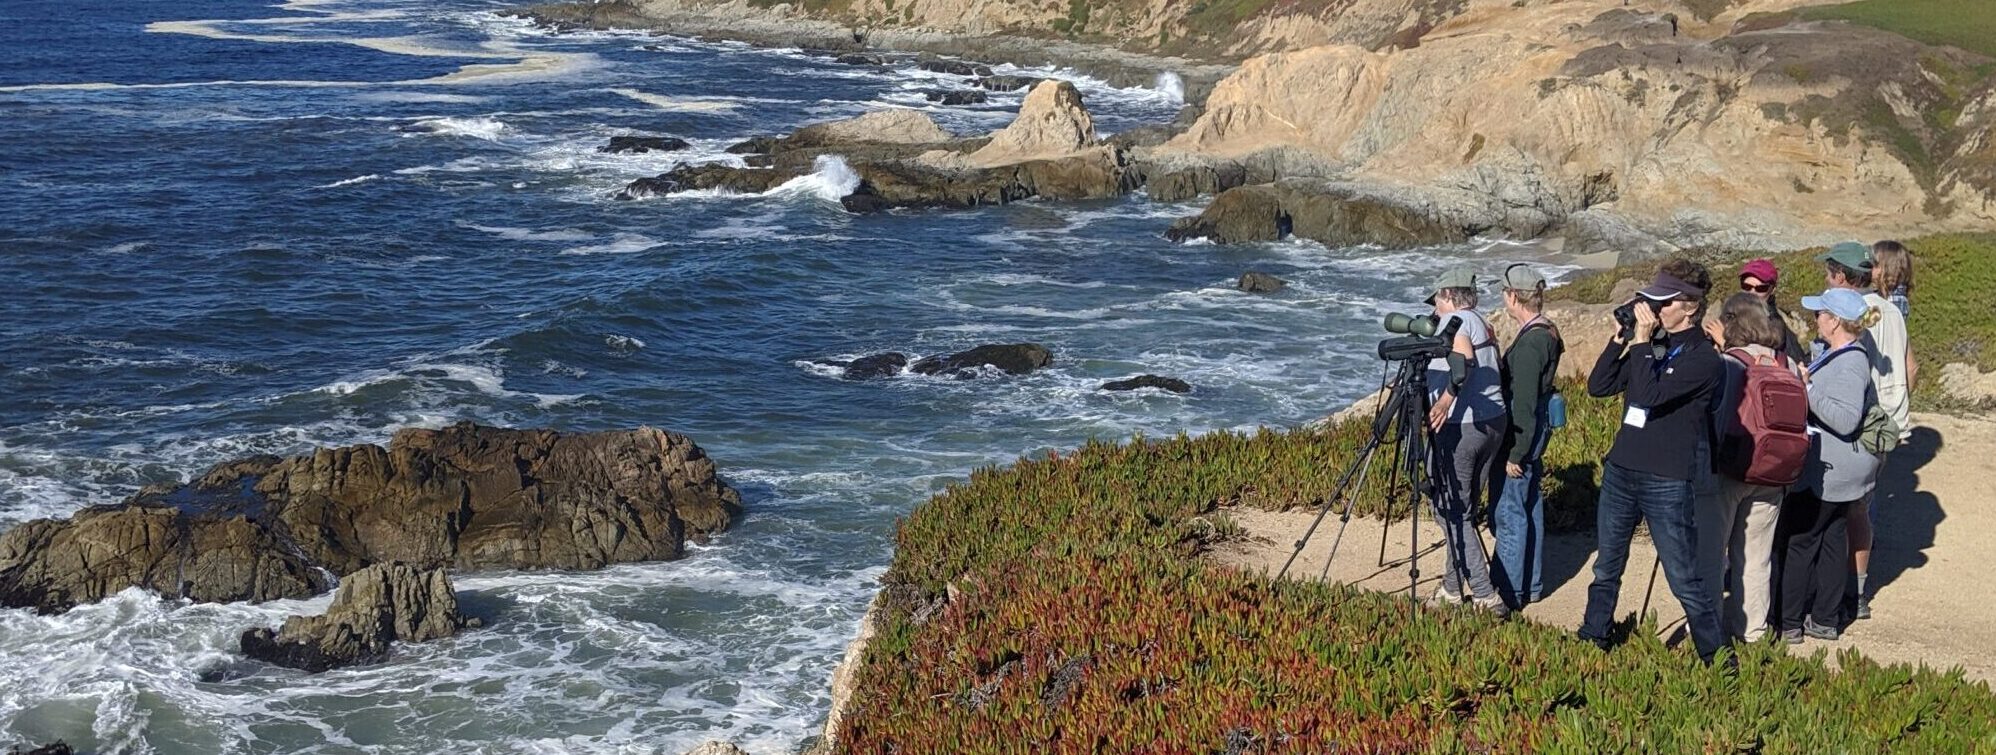 A group of Beach Watch Volunteers survey a rocky shoreline from atop a high coastal bluff. Ice plant is red and green on the cliff faces and waves are crashing onto the bluffs.